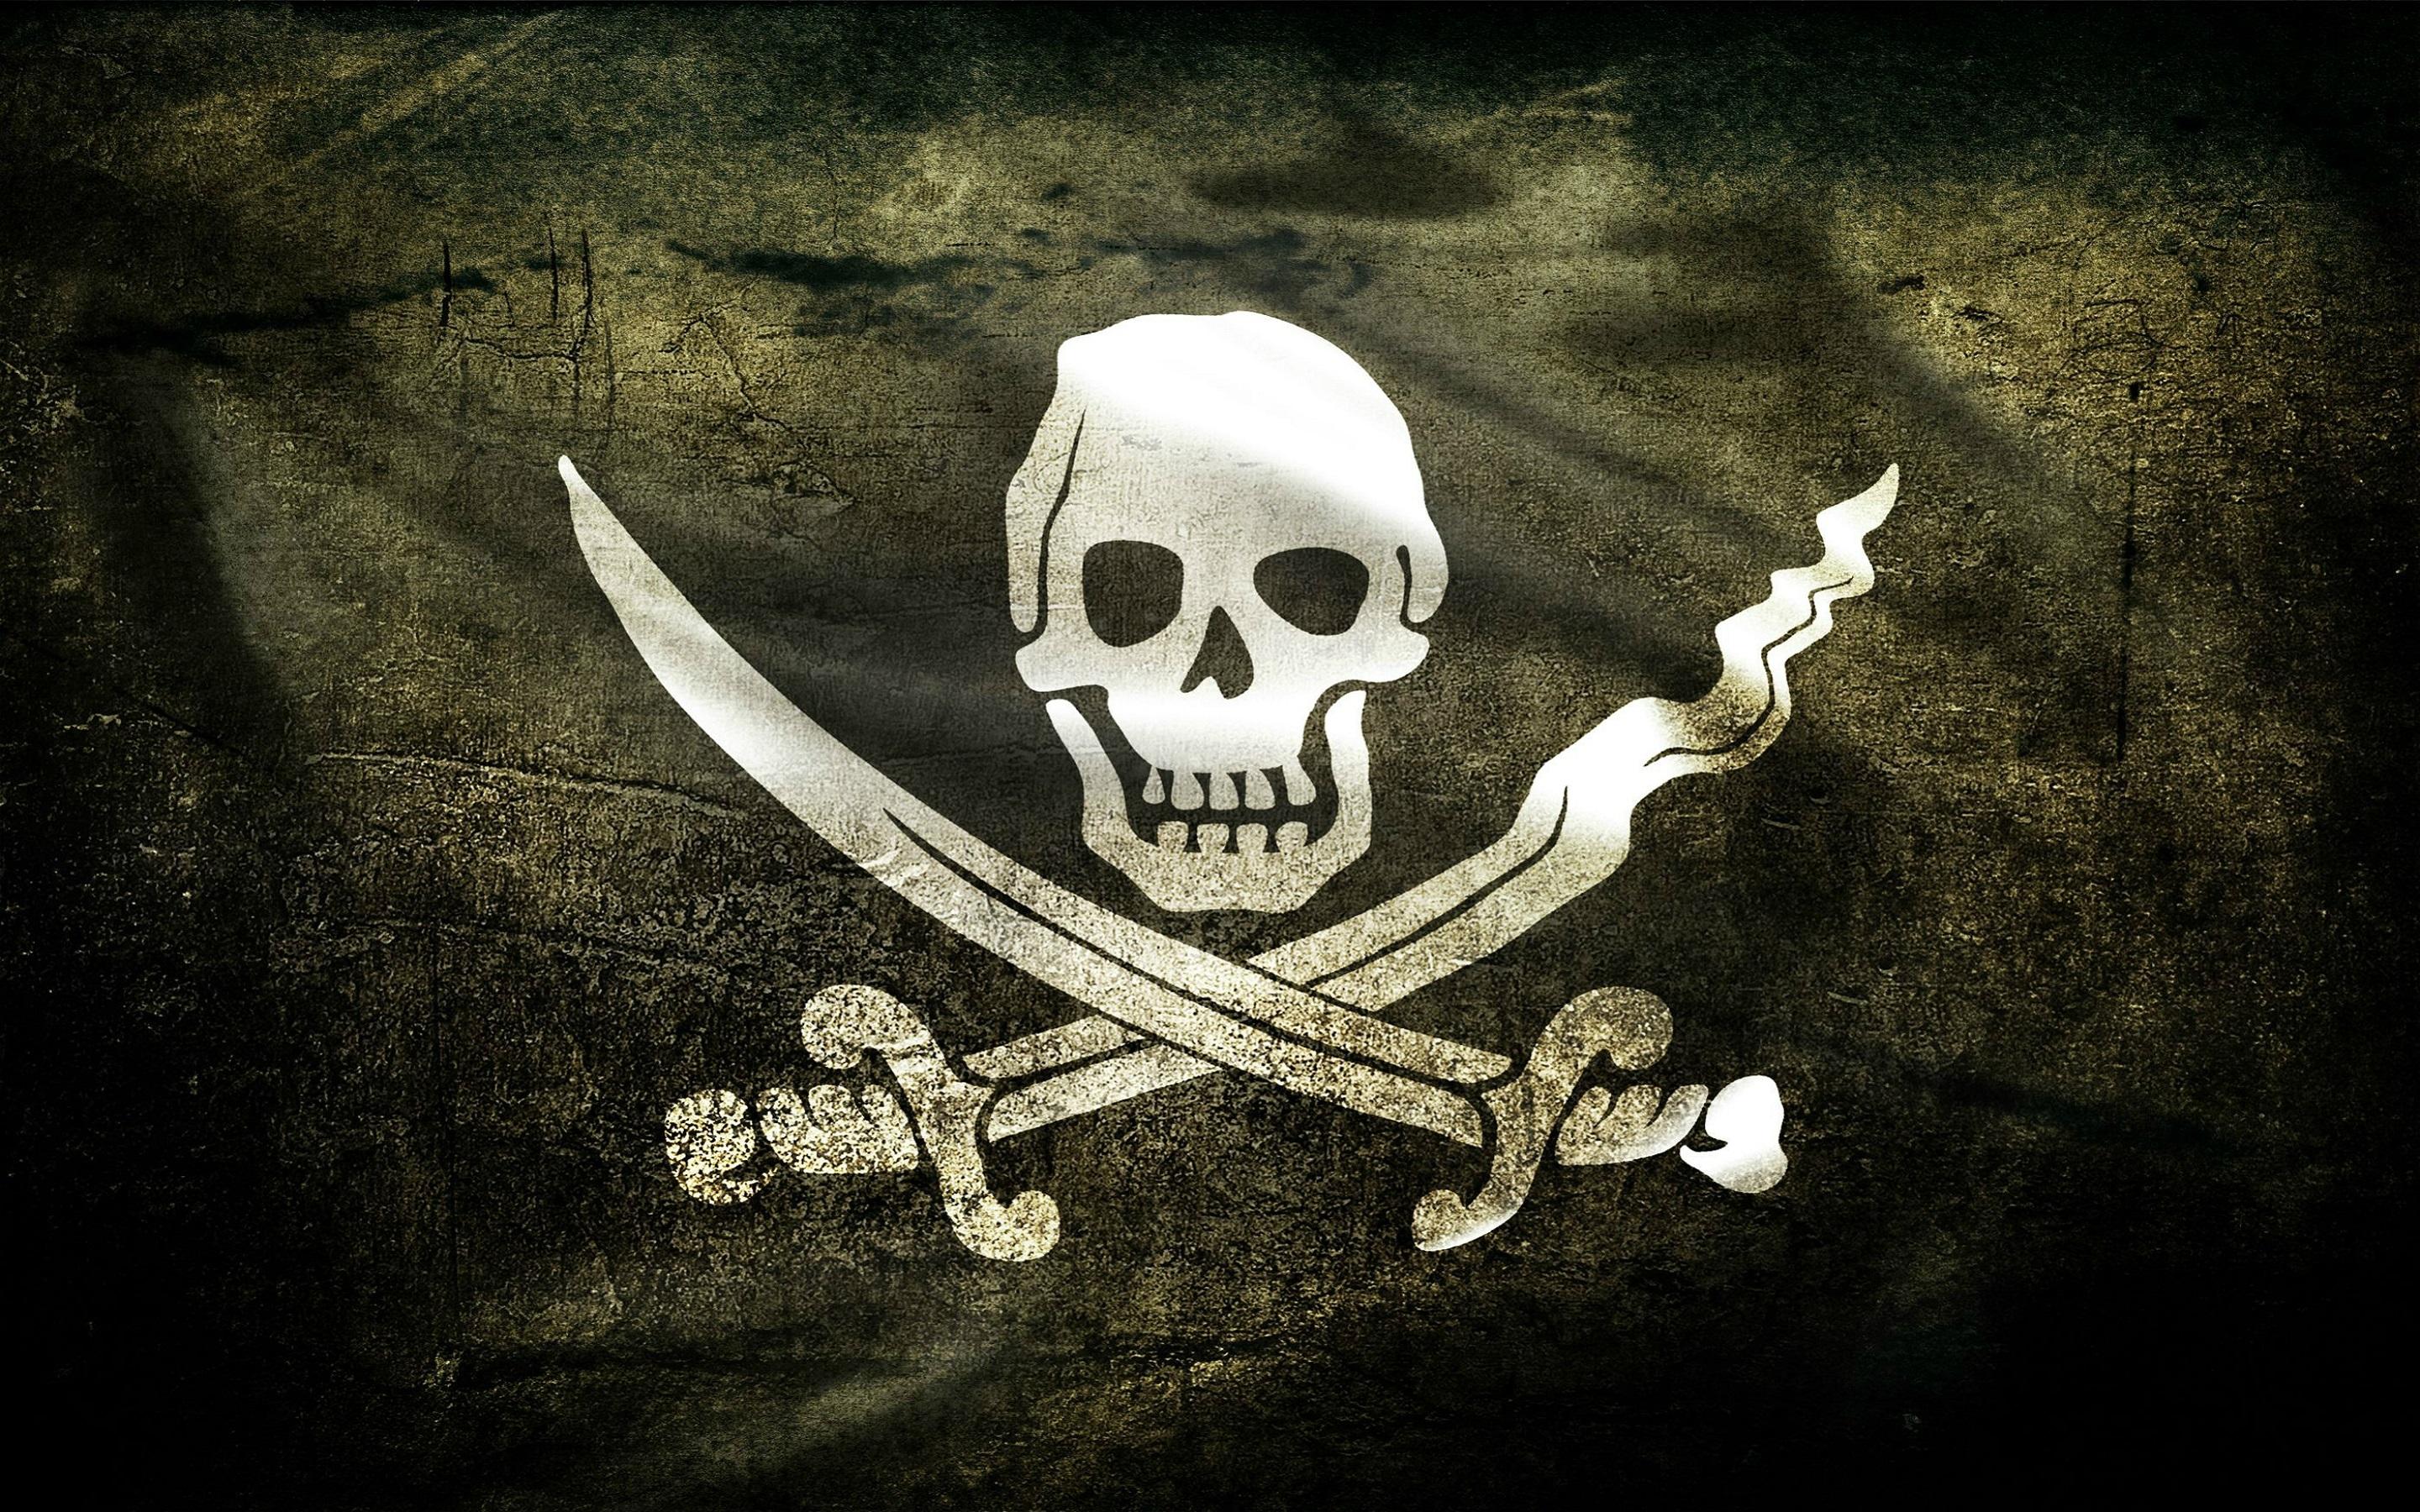 Sea Pirate Wallpapers Best Backgrounds